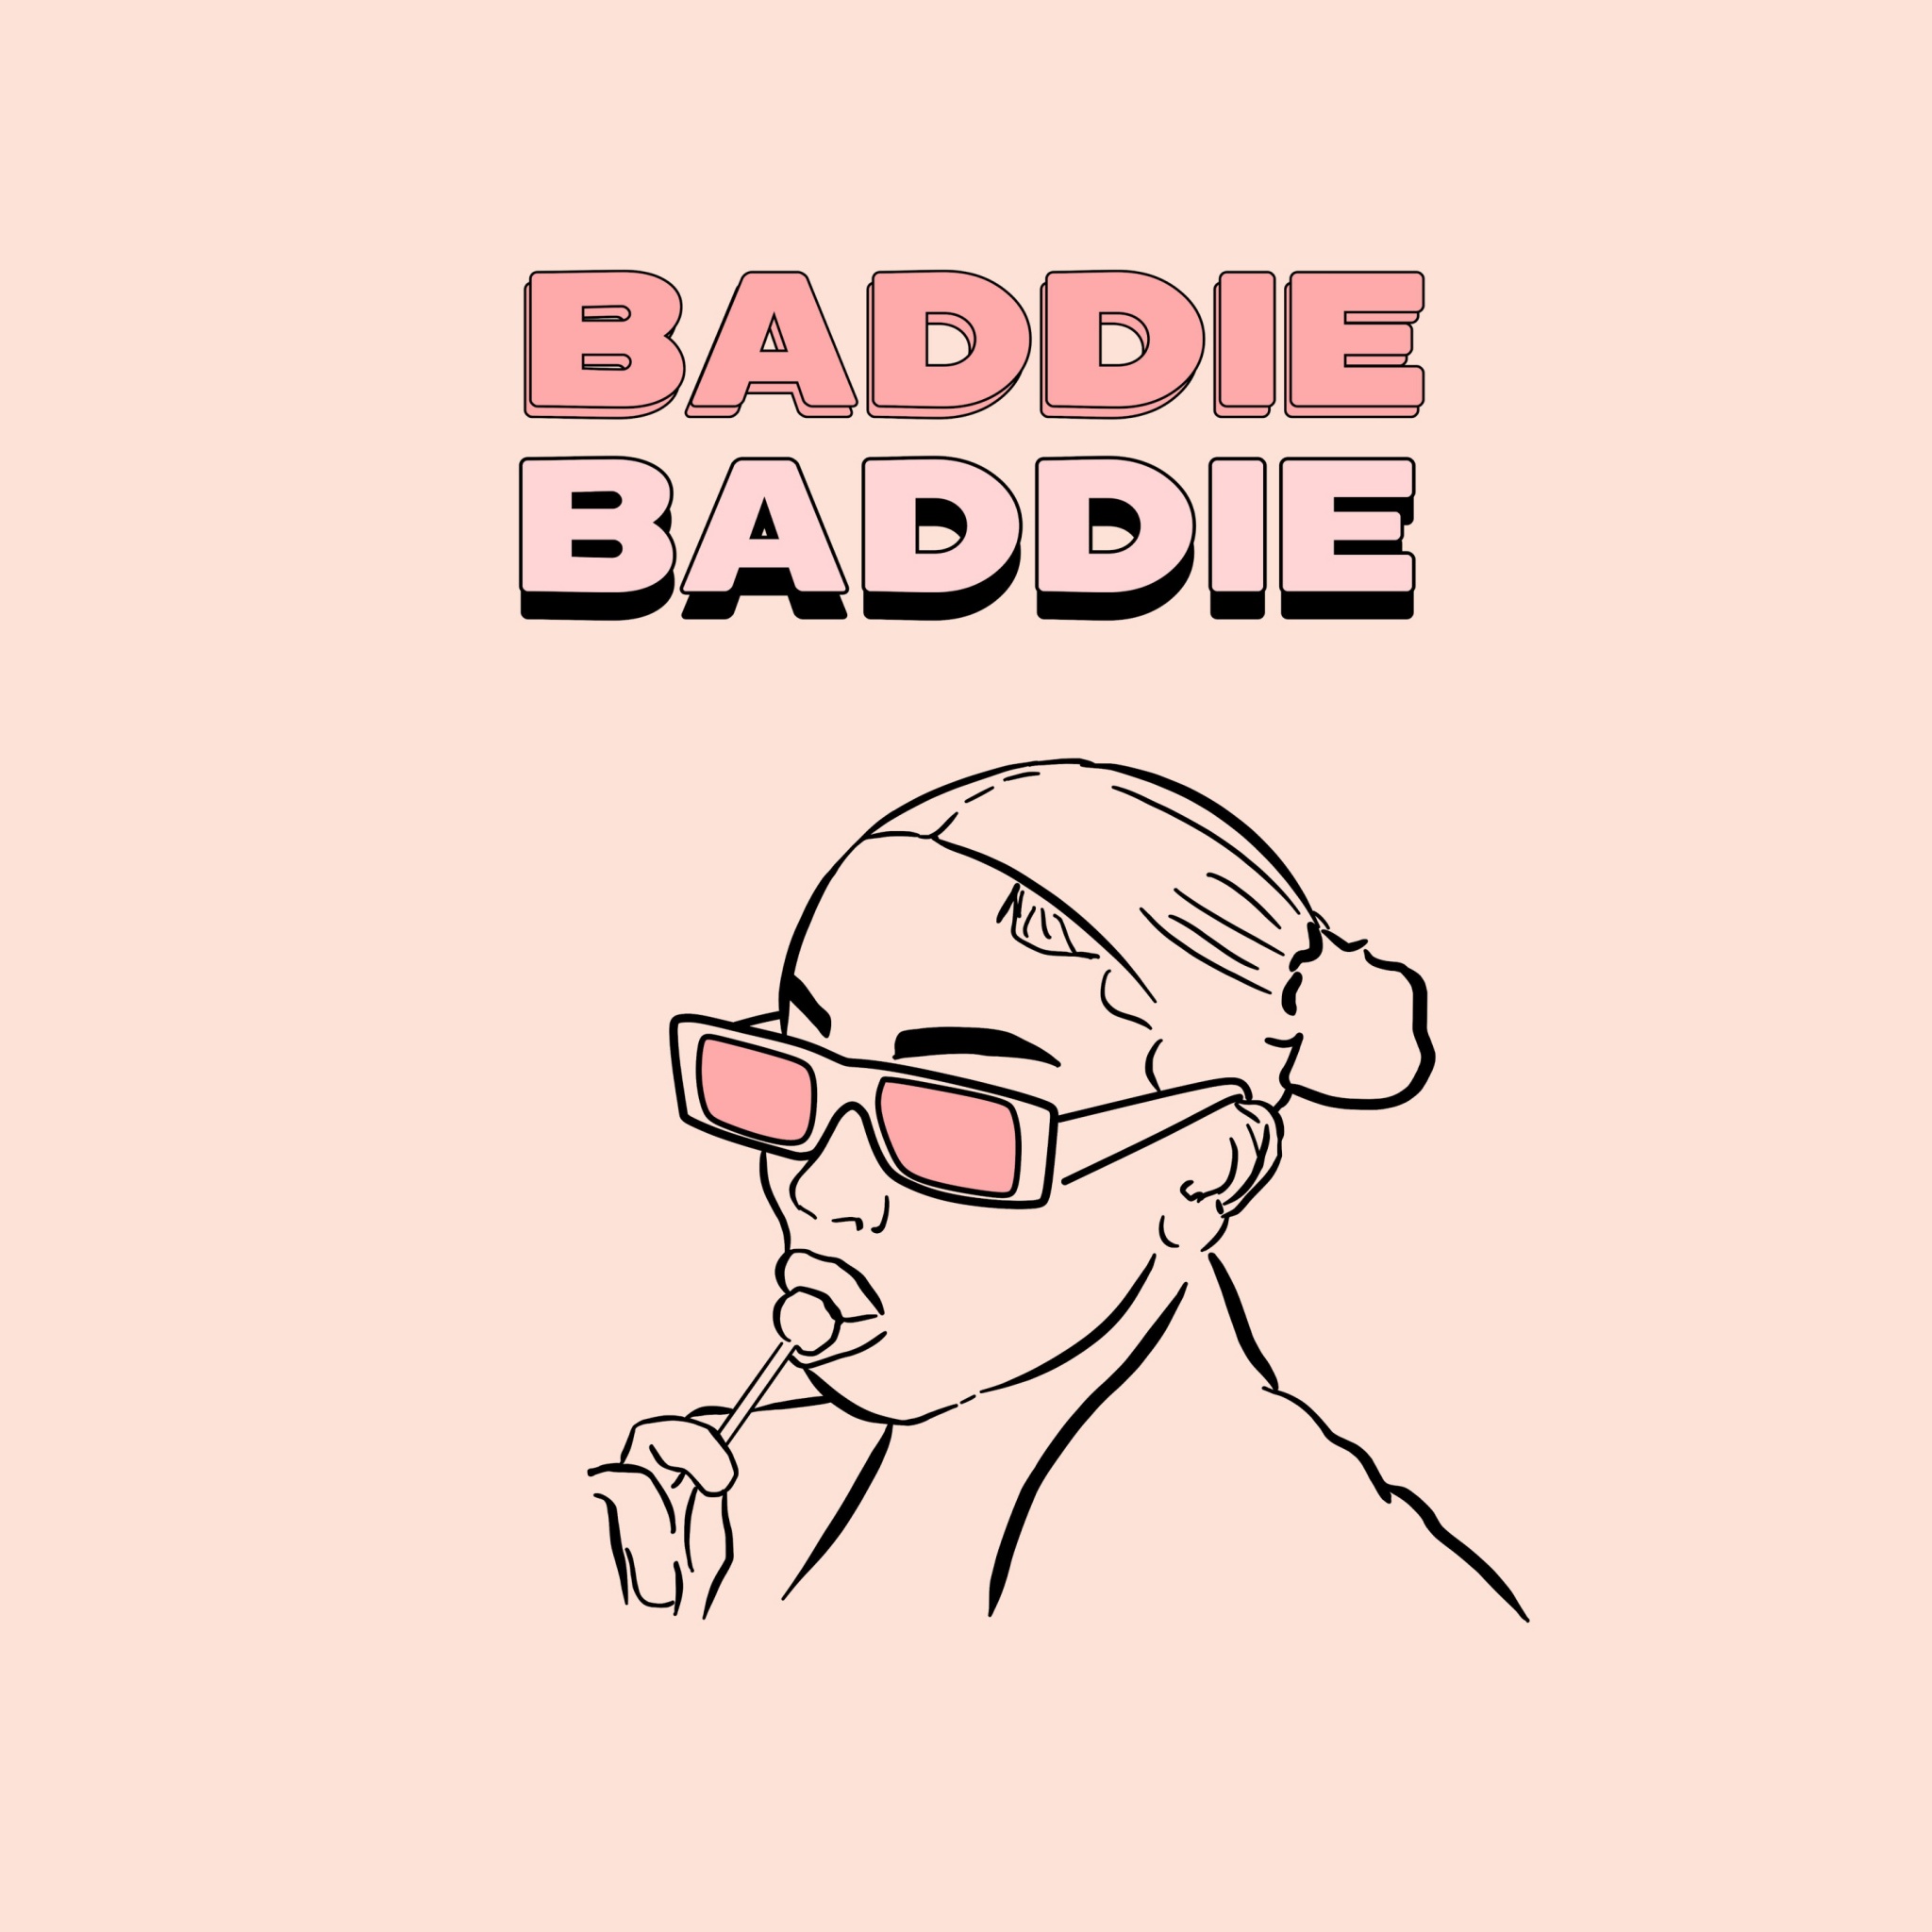 Top 20 Baddie Wallpapers for Black Girls 2023  Do It Before Me